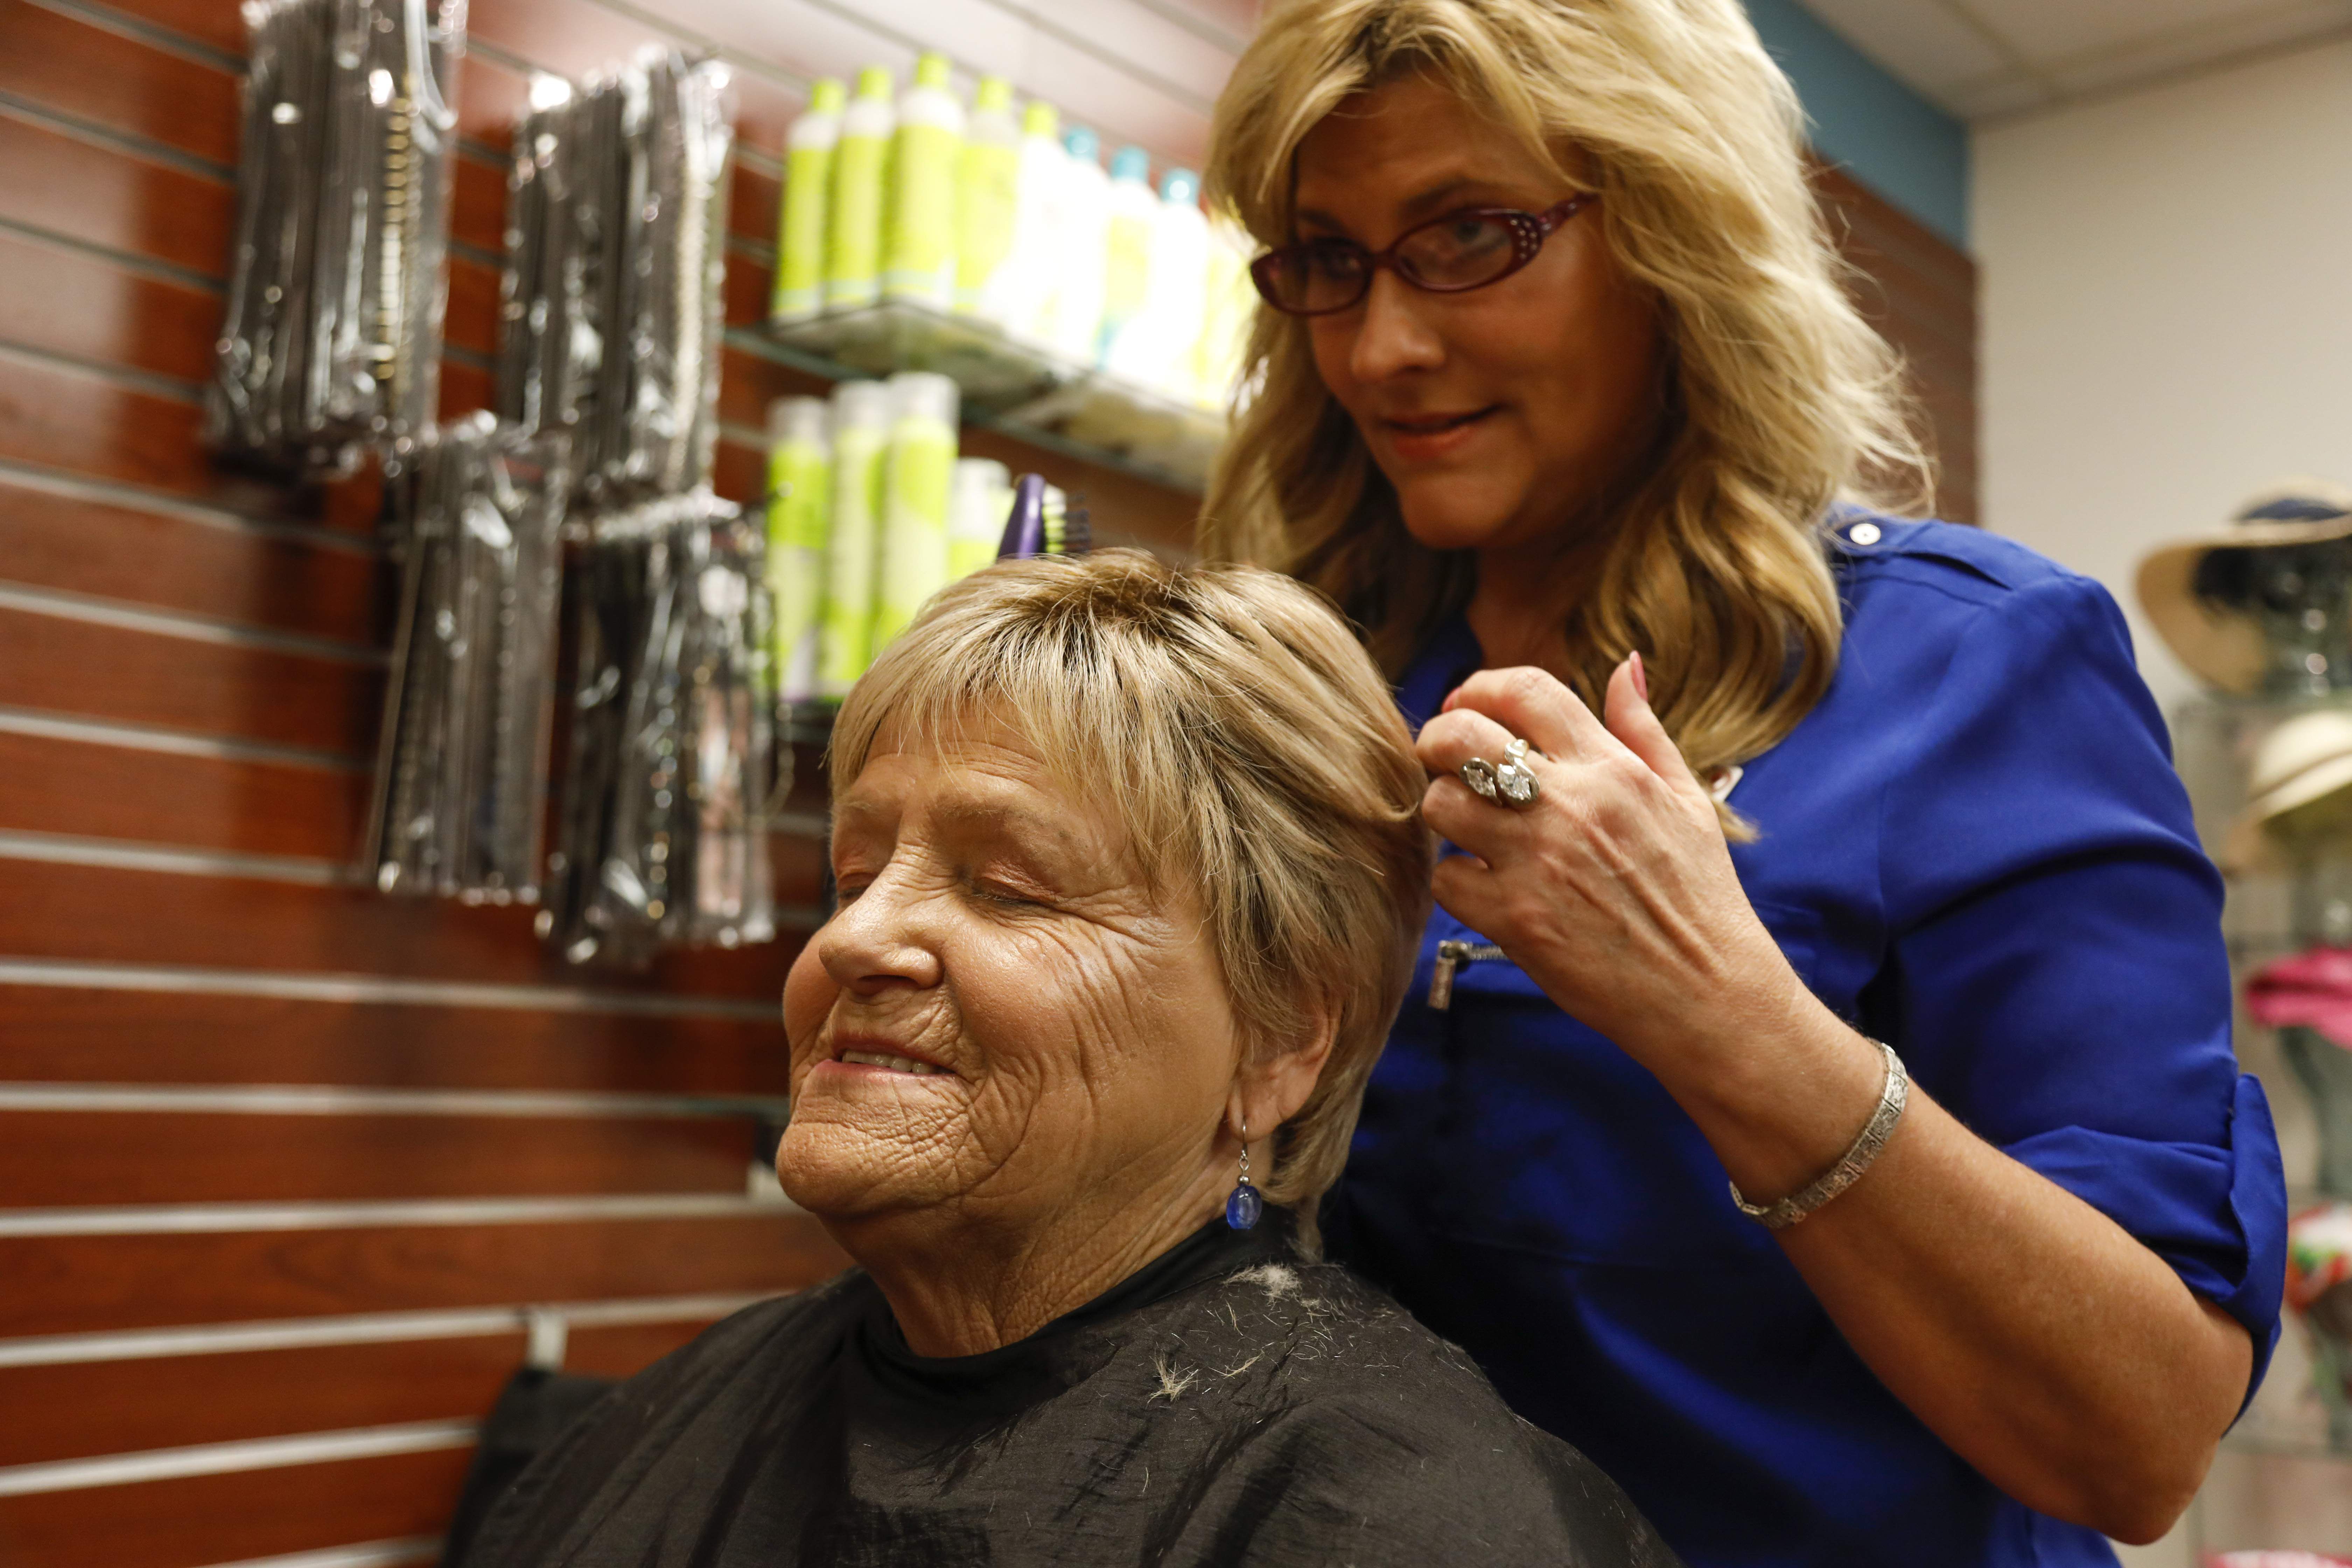 Cancer patients find help, inspiration at hair salon